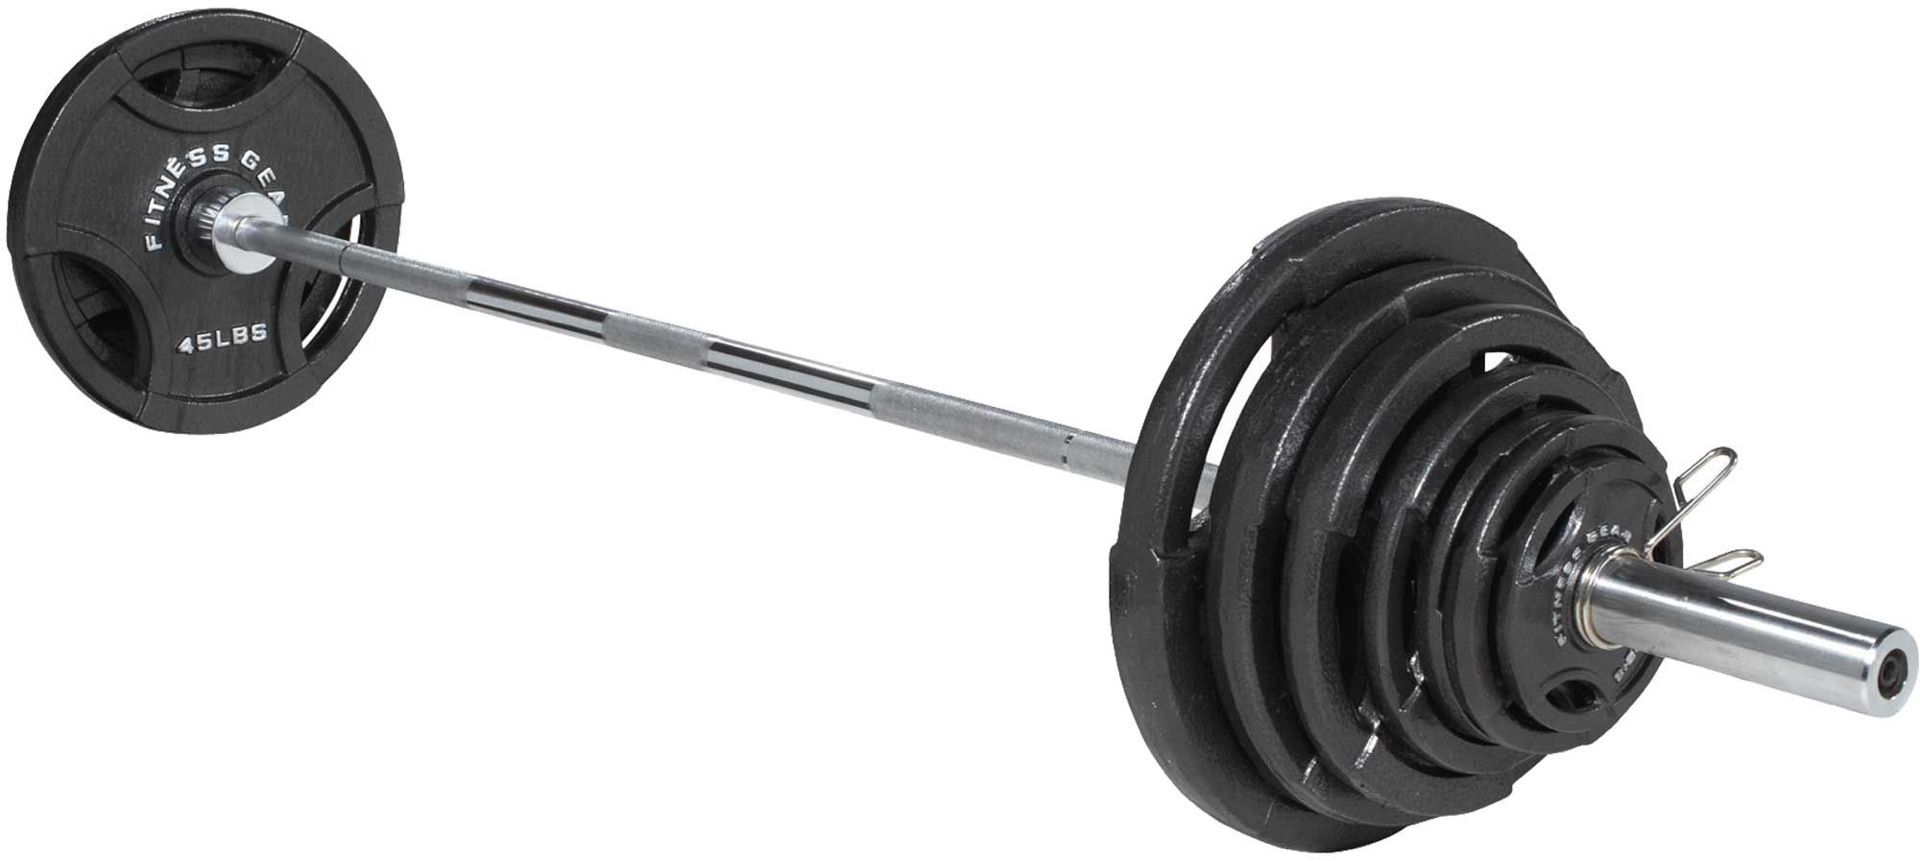 Fitness Gear 300lb OLYMPIC Weight set